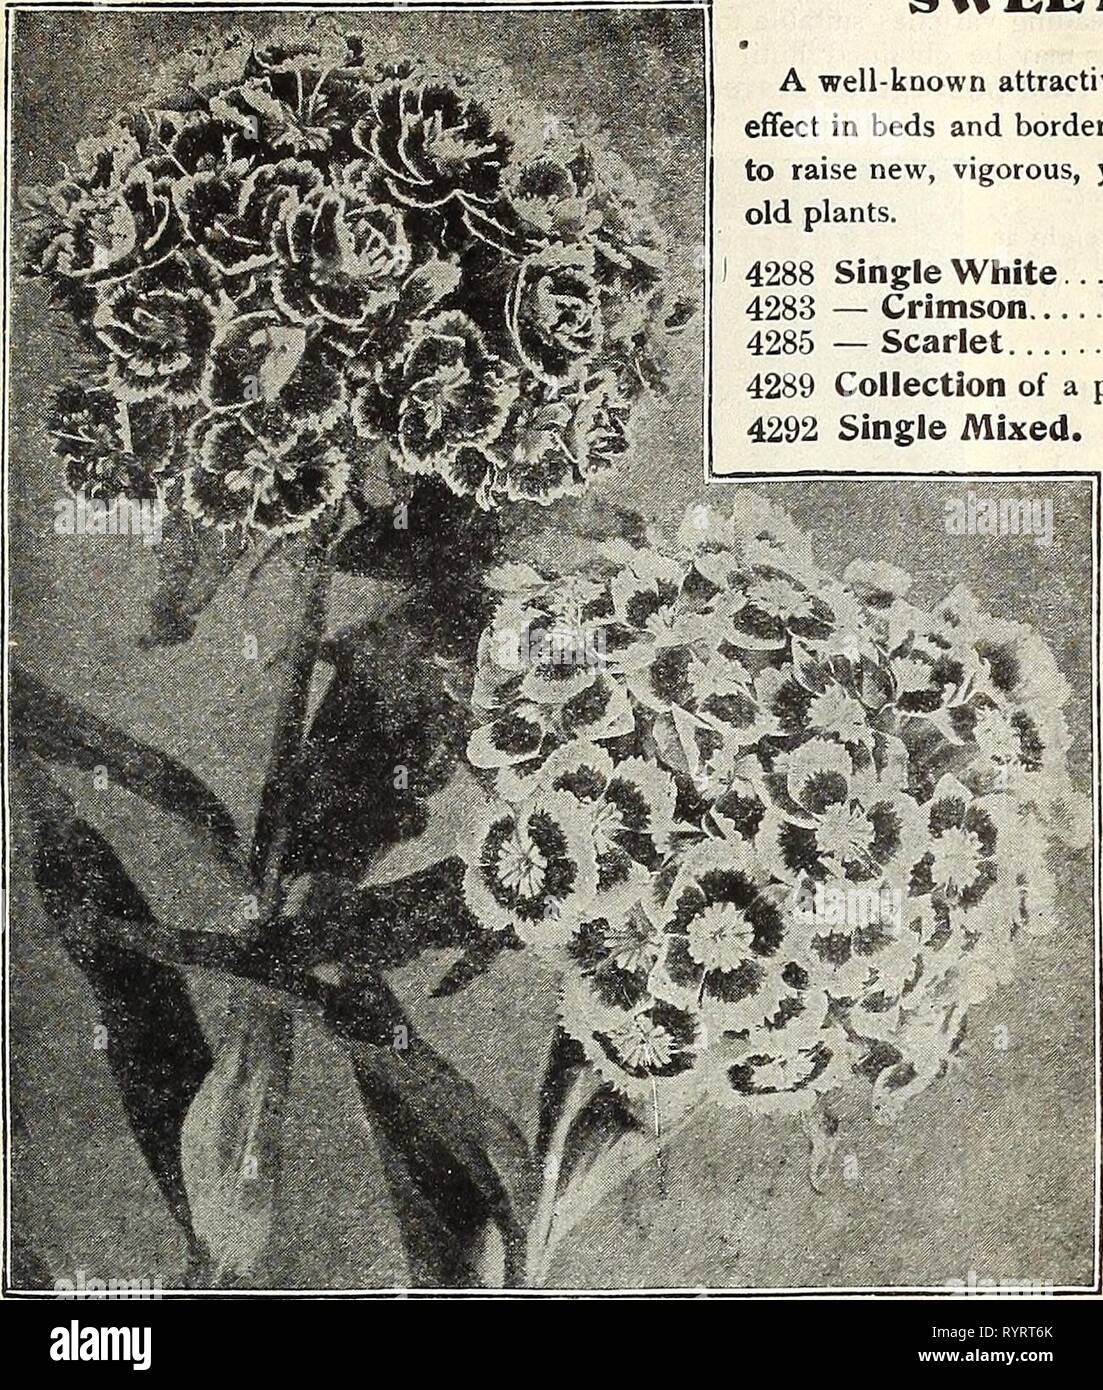 Dreer's mid-summer catalogue 1916 (1916) Dreer's mid-summer catalogue 1916 . dreersmidsummerc1916henr Year: 1916  HENRY A. DREER, PHILADELPHIA—FLOWER SEEDS 55    Double and Single Sweet William. TRITOMA. (Red-hot Poker, Flame Flower, or Torch Lily.) PER PKT. 4330 Hybrida. The introduction of new, continuous flow- ering Tritomas has given them a prominent place among hardy bedding plants. It is not generally known that they are readily grown from seed. The seed we offer has been saved from our own collection, which is undoubtedly tiie finest in this country. Of course, for immediate results it  Stock Photo